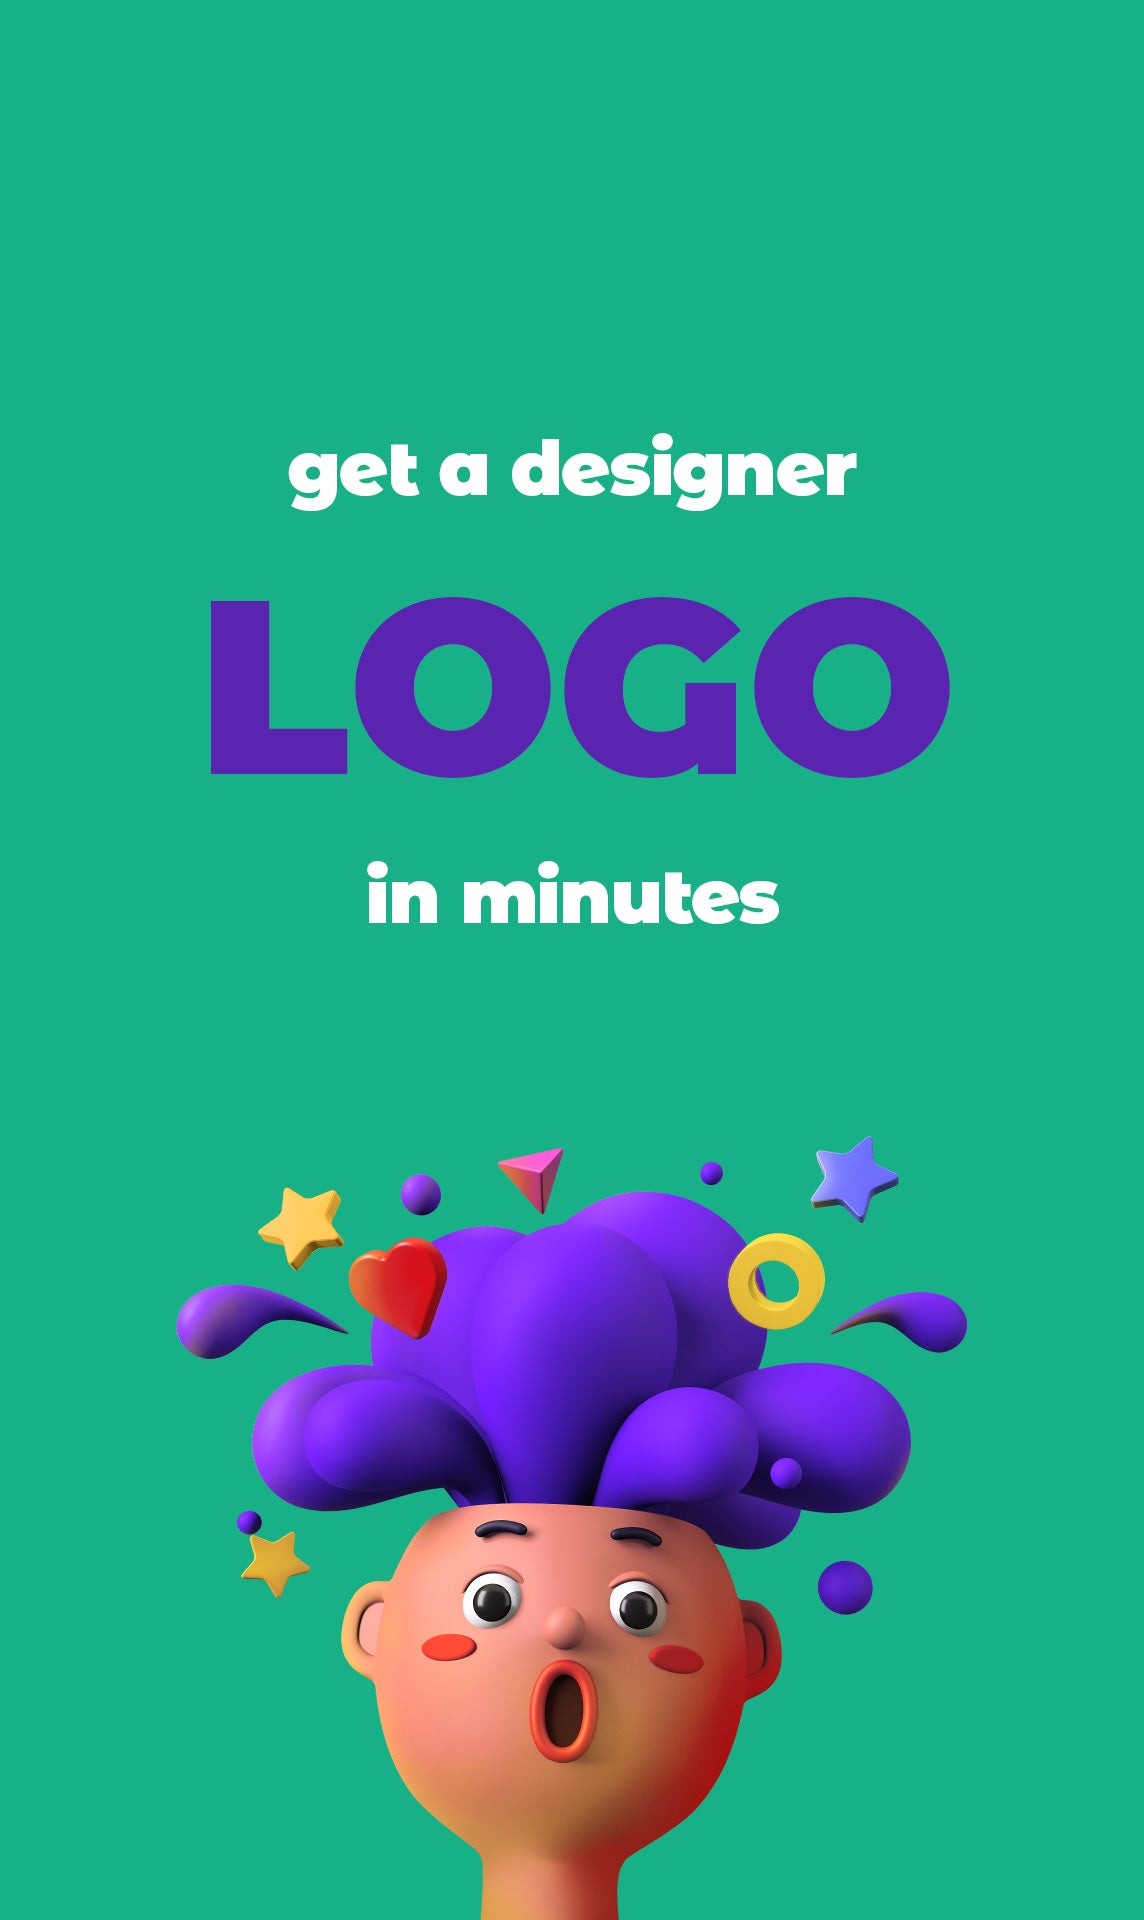 An image showing a person being with a surprised expression on his face along with the text that reads a "a designer logo in minutes".